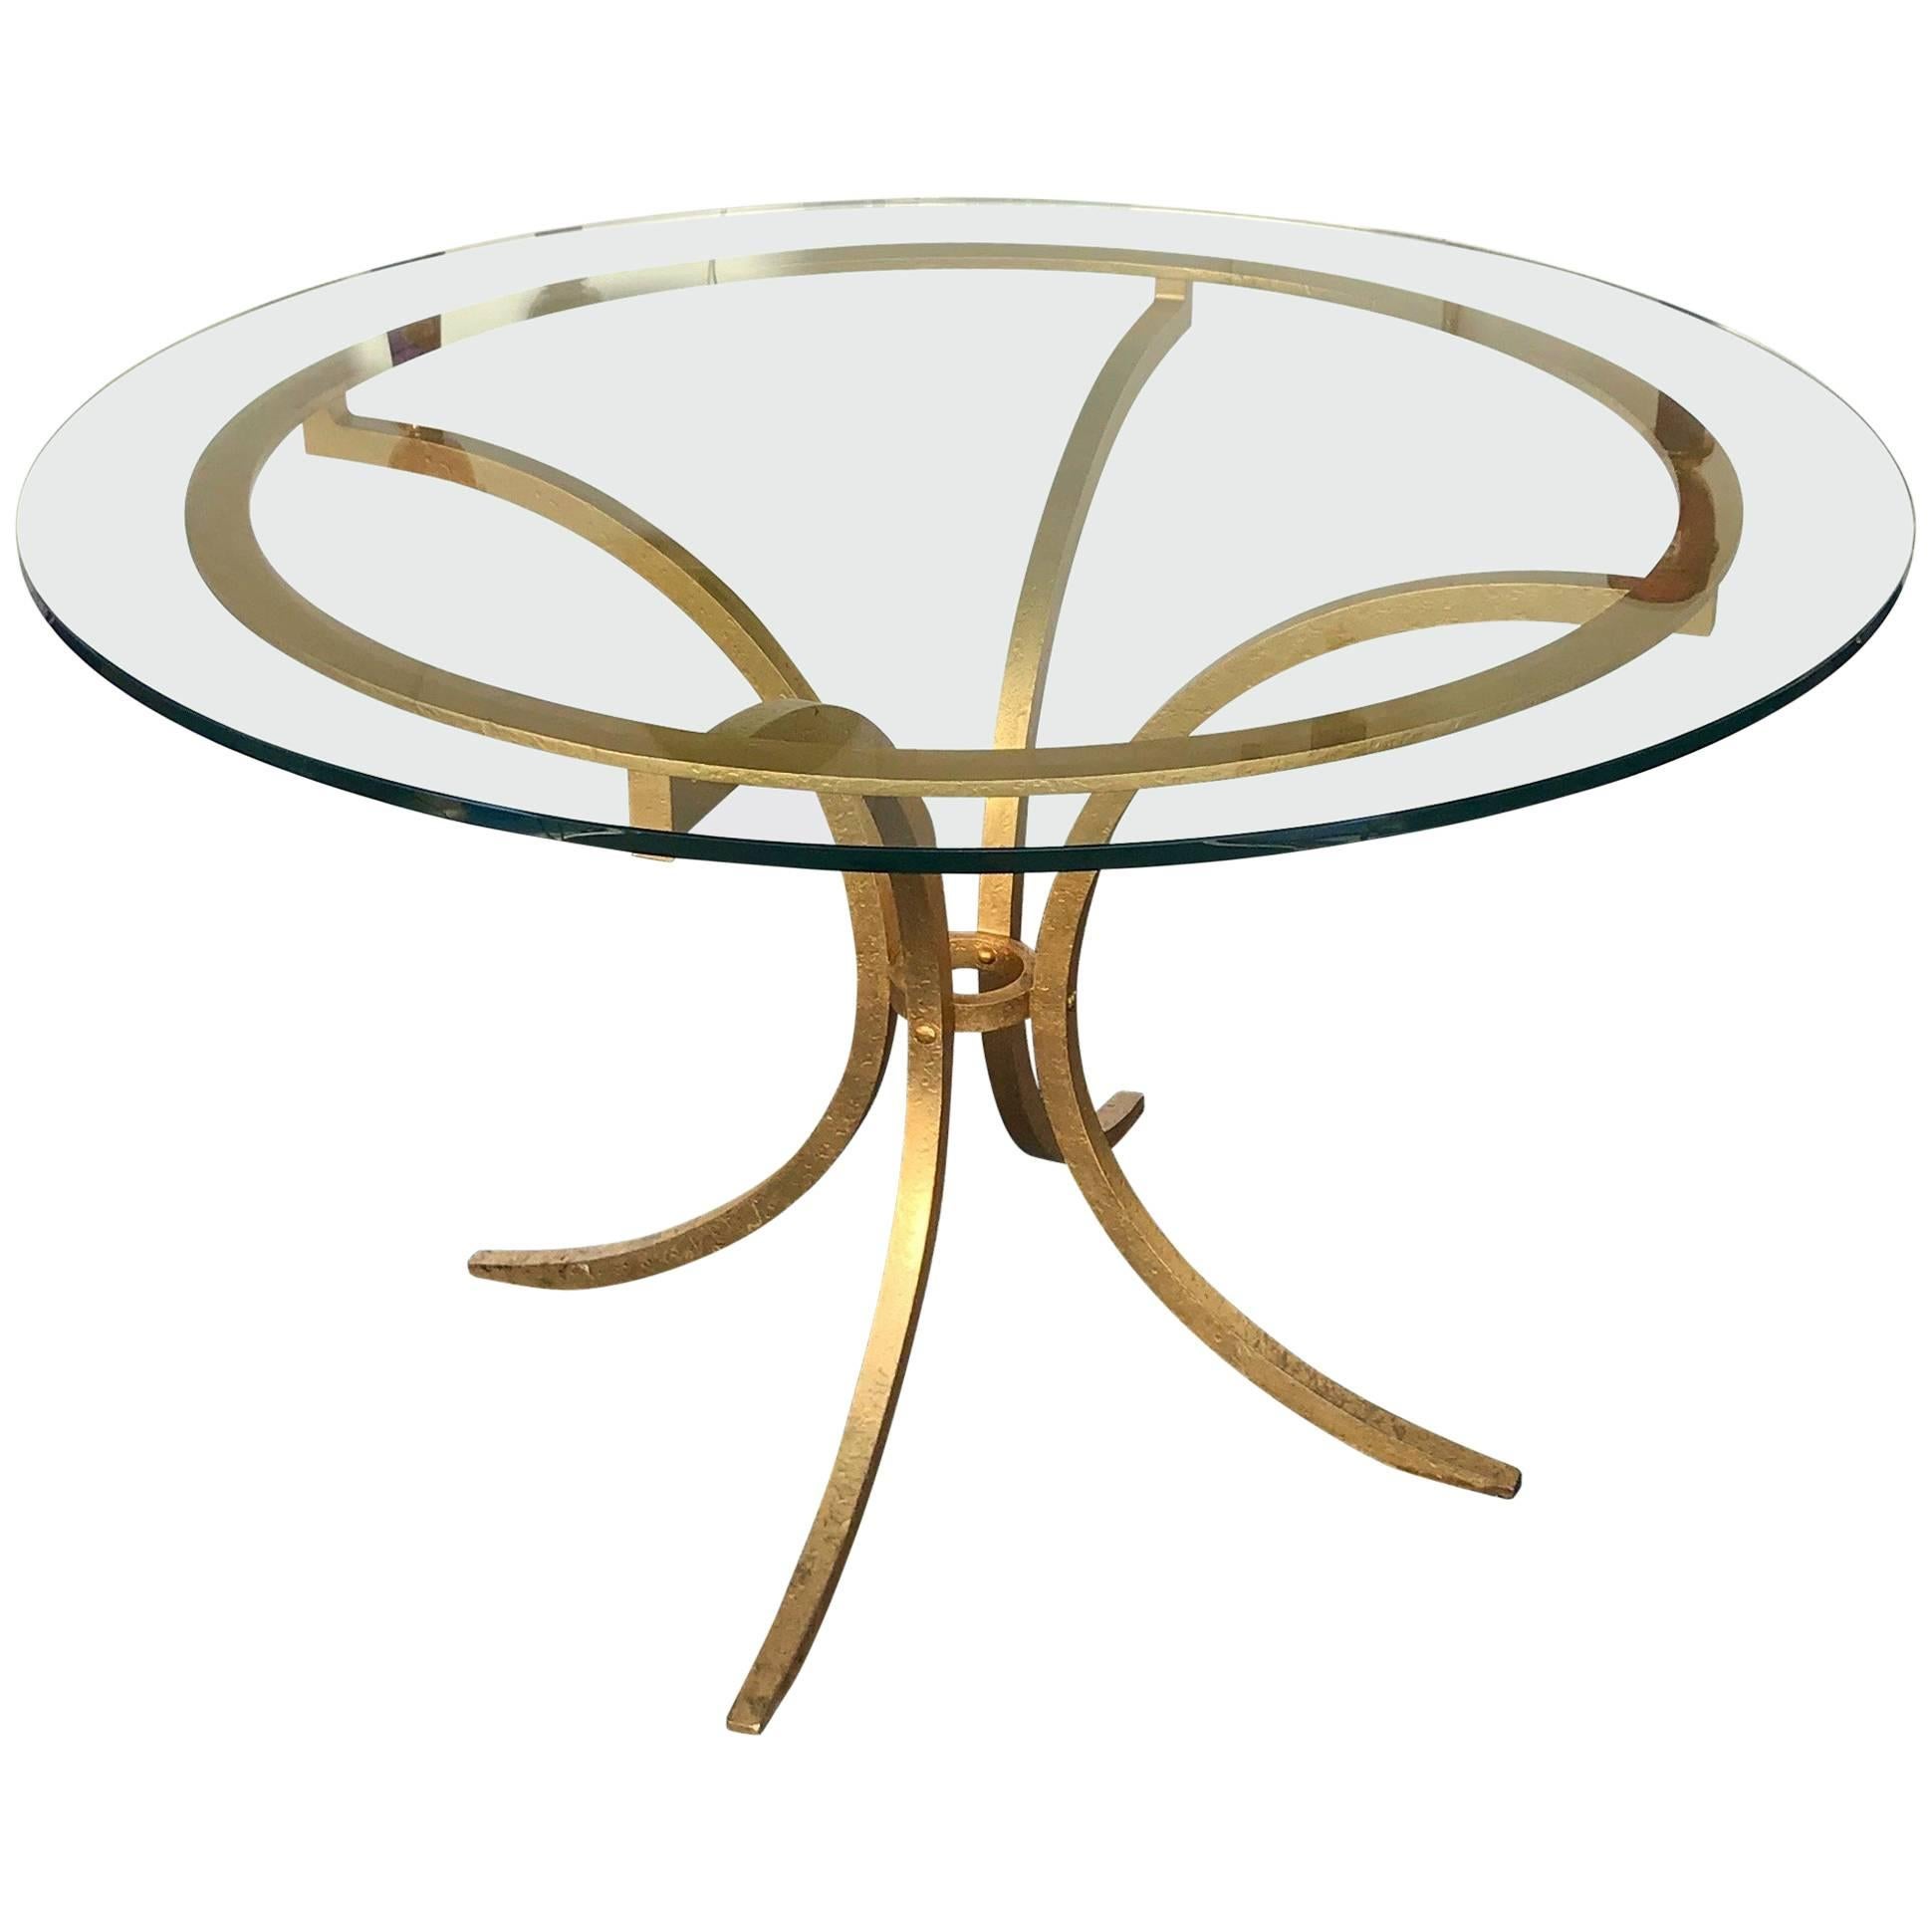 Table Wrought Iron Gold Leaf by Robert and Roger Thibier, France, 1960s